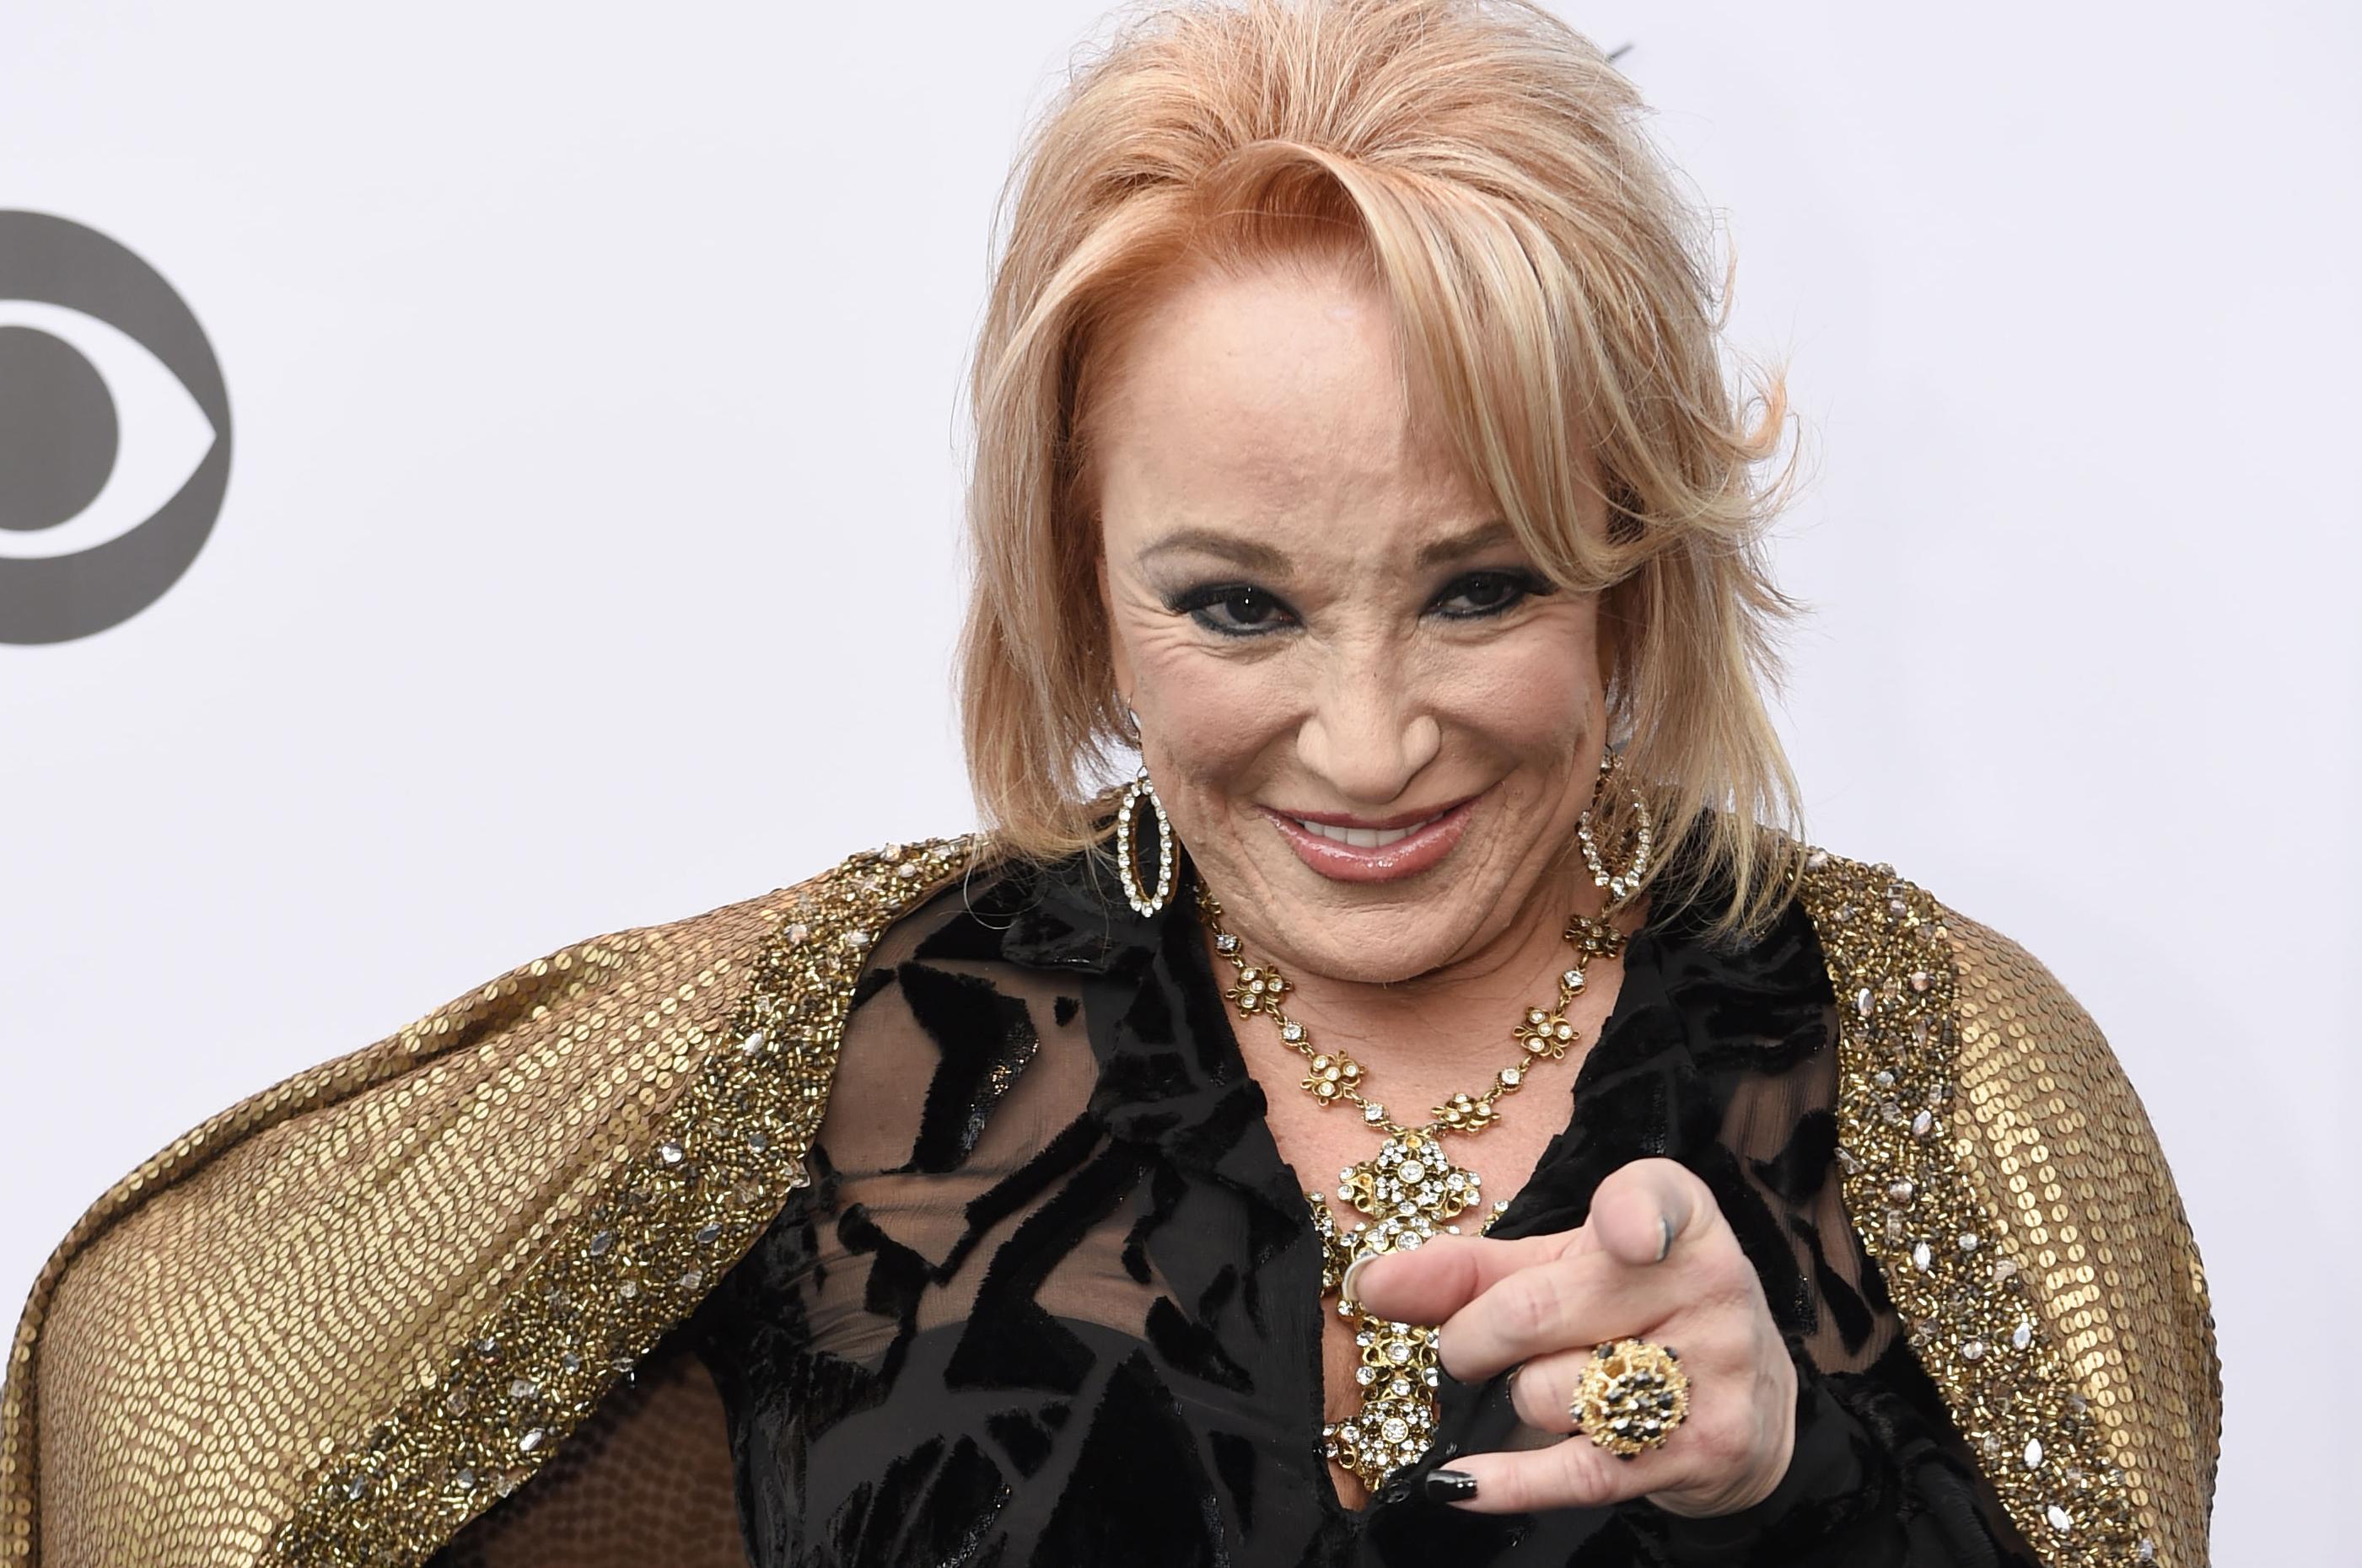 Tanya Tucker’s rescheduled Spokane show now canceled | The Spokesman-Review